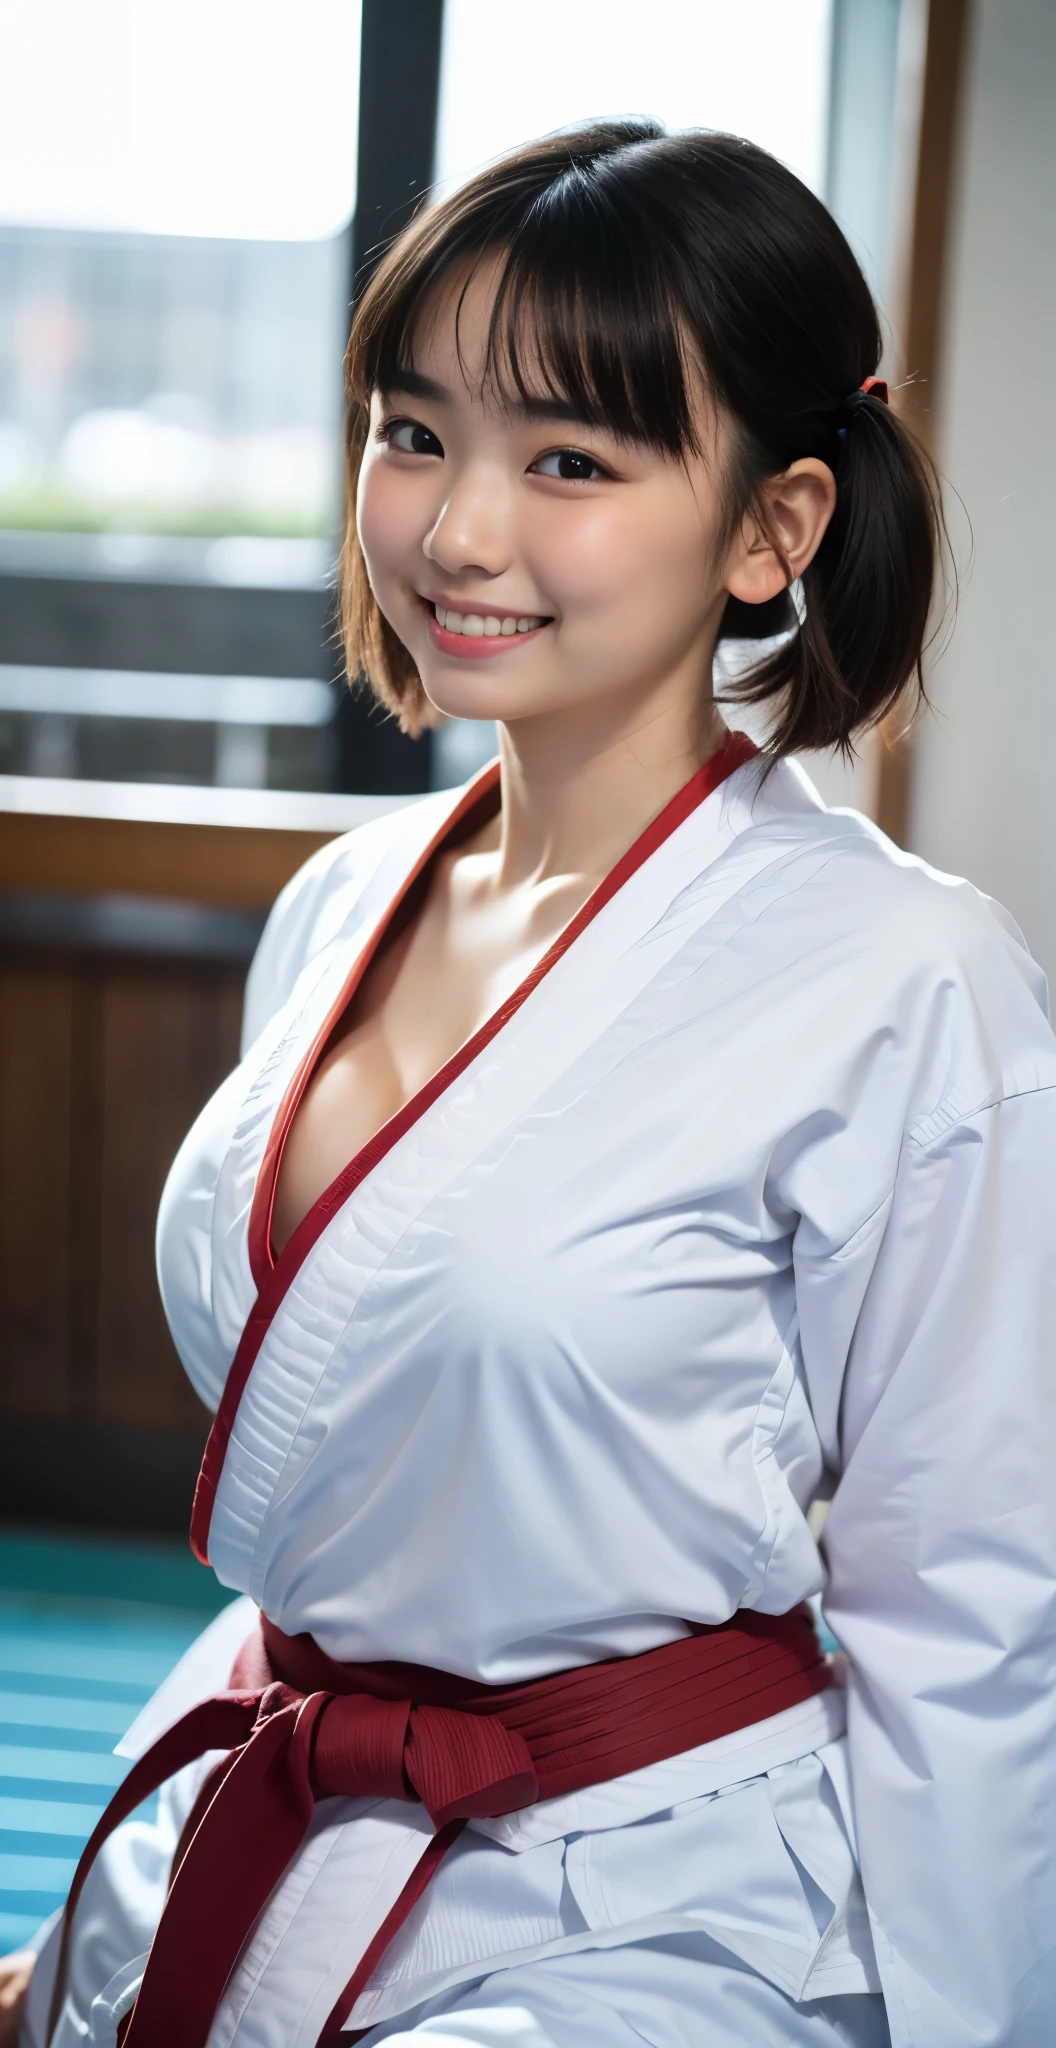 （8k、Raw photography、highest quality、masterpiece：1.2),(black haired、very short hair:1.8),(short twin tails:1.4)、show viewer,Looking at the front,erotic,white skin,(wearing a karate kimono:1.7)、(dojo)、(Clothing that emphasizes the shape of your chest、exposing skin:1.7)、(big breasts :1.4)、slim body shape、ultra high resolution,beautiful,beautiful fece,(alone, alone、no background:1.9),whole bodyボディー,japanese woman,（Photoreal：1.37）、photon mapping,reality、(Baby-faced and cute: 1.4)、(cute smile: 1.7)、(With a round face: 1.9)、radio city、Physically based rendering、depth of field rally background、photograph, (I can see your knees,close up of thighs:1.4),whole body、super fine